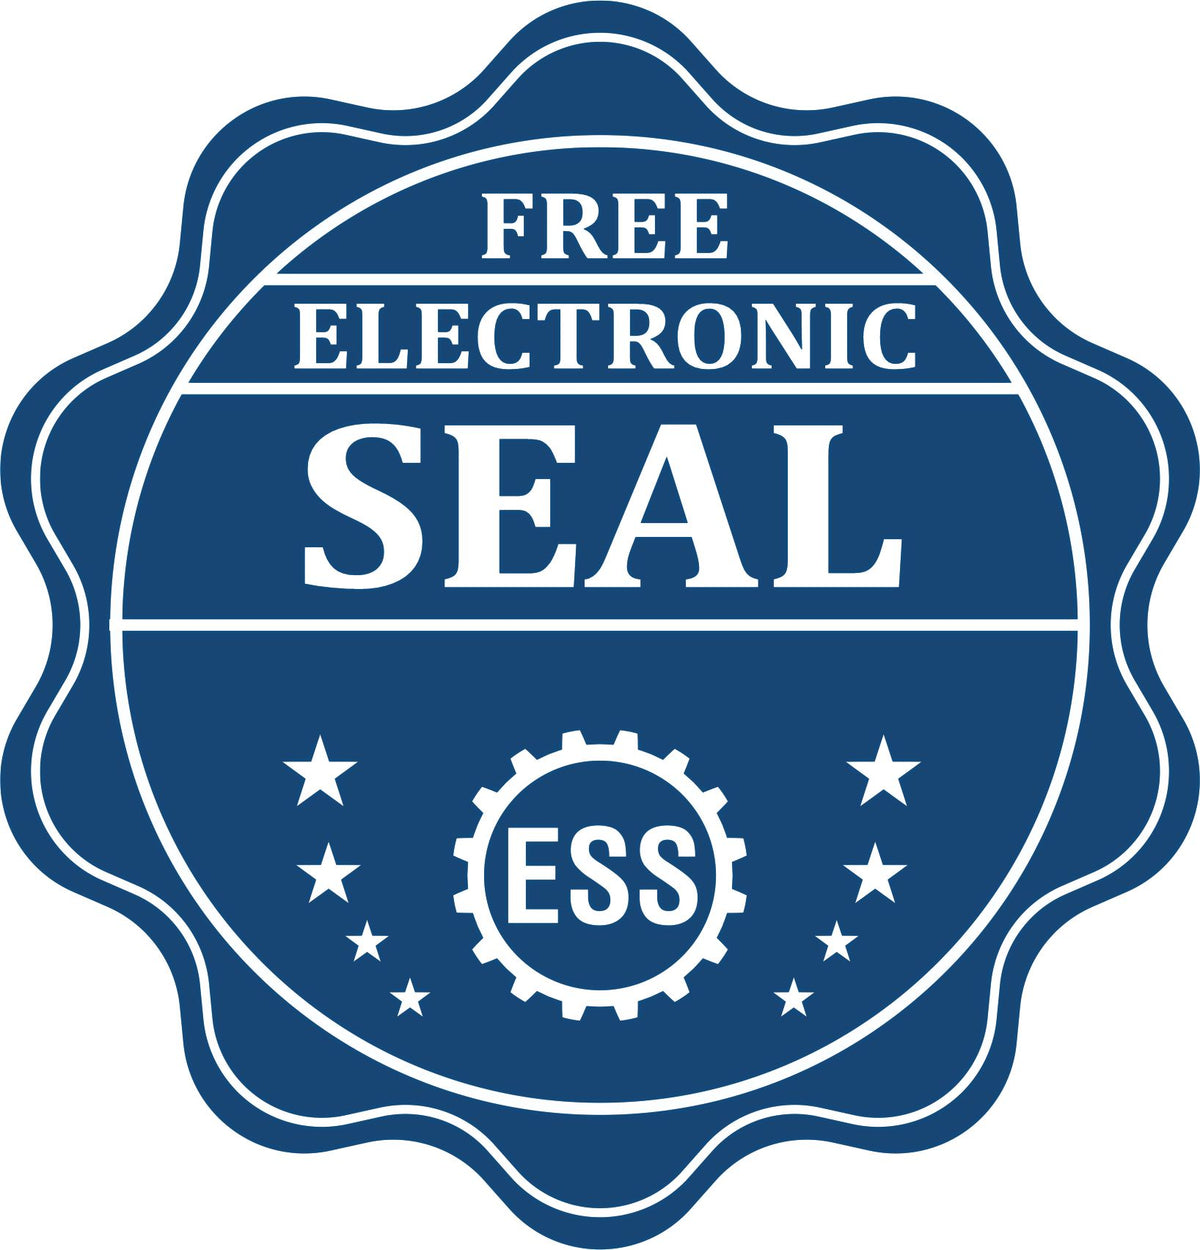 A badge showing a free electronic seal for the Gift New Hampshire Engineer Seal with stars and the ESS gear on the emblem.